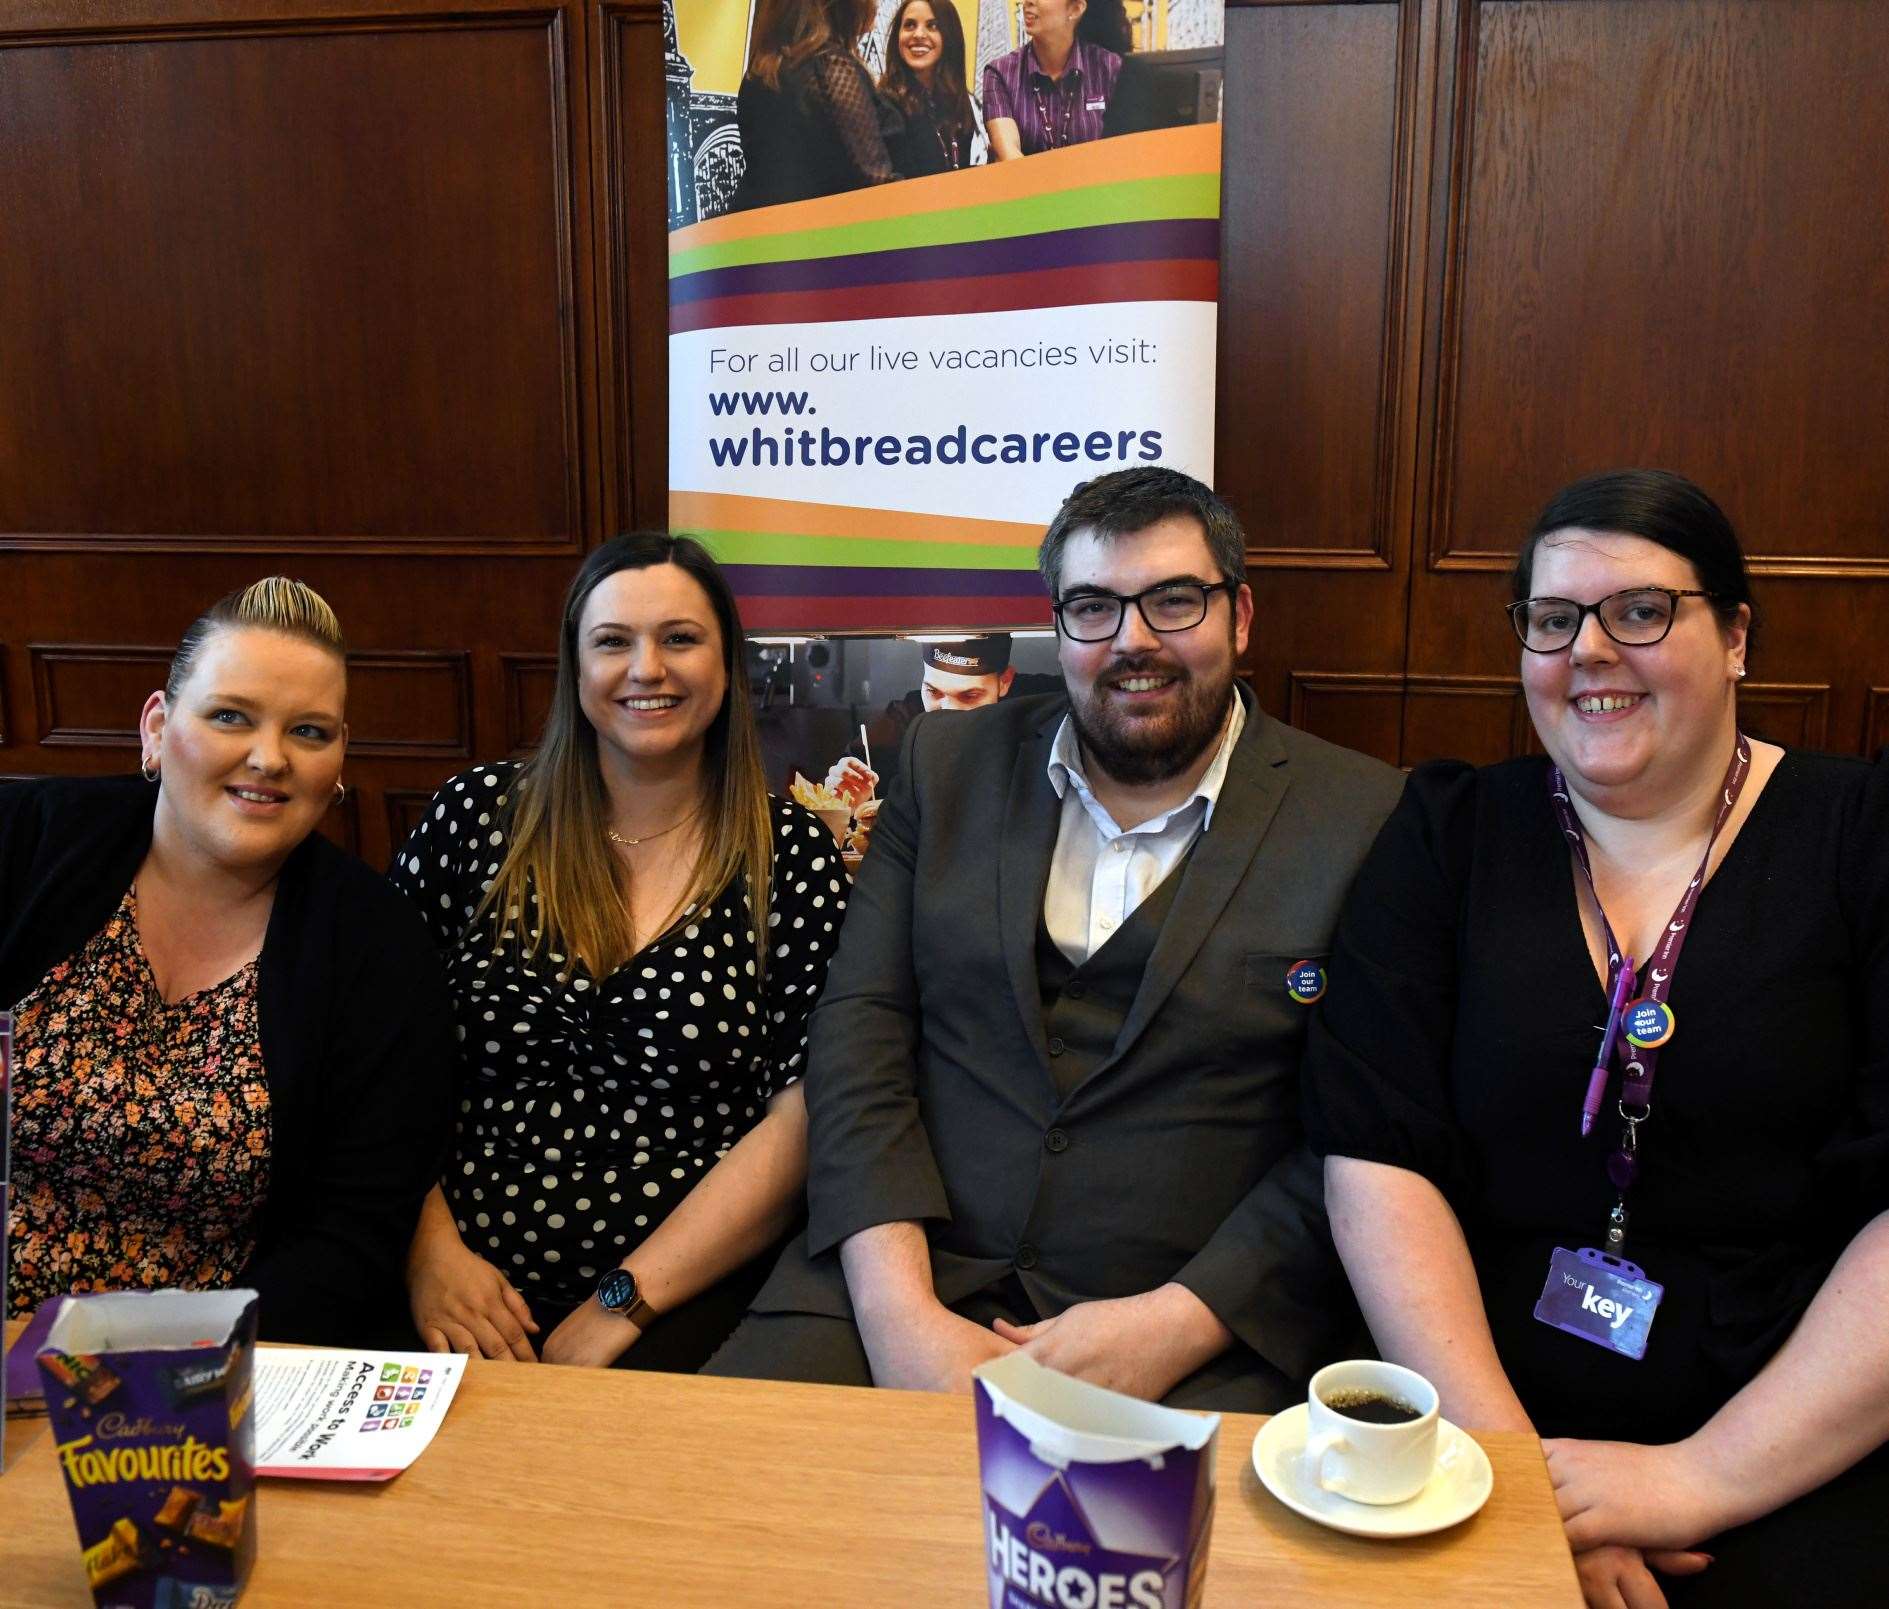 Hotel recruitment drive at Inverness Town House. Kelly Anderson, deputy hotel manager, Premiere Inn West, Hollie Maclennan, hotel manager Premiere Inn East & West, Dean Cruickshank, hotel manager Premiere Inn Millburn Road and River Ness and Amber Johnston, deputy hotel manager at Millburn Road Premiere Inn. Picture: James Mackenzie